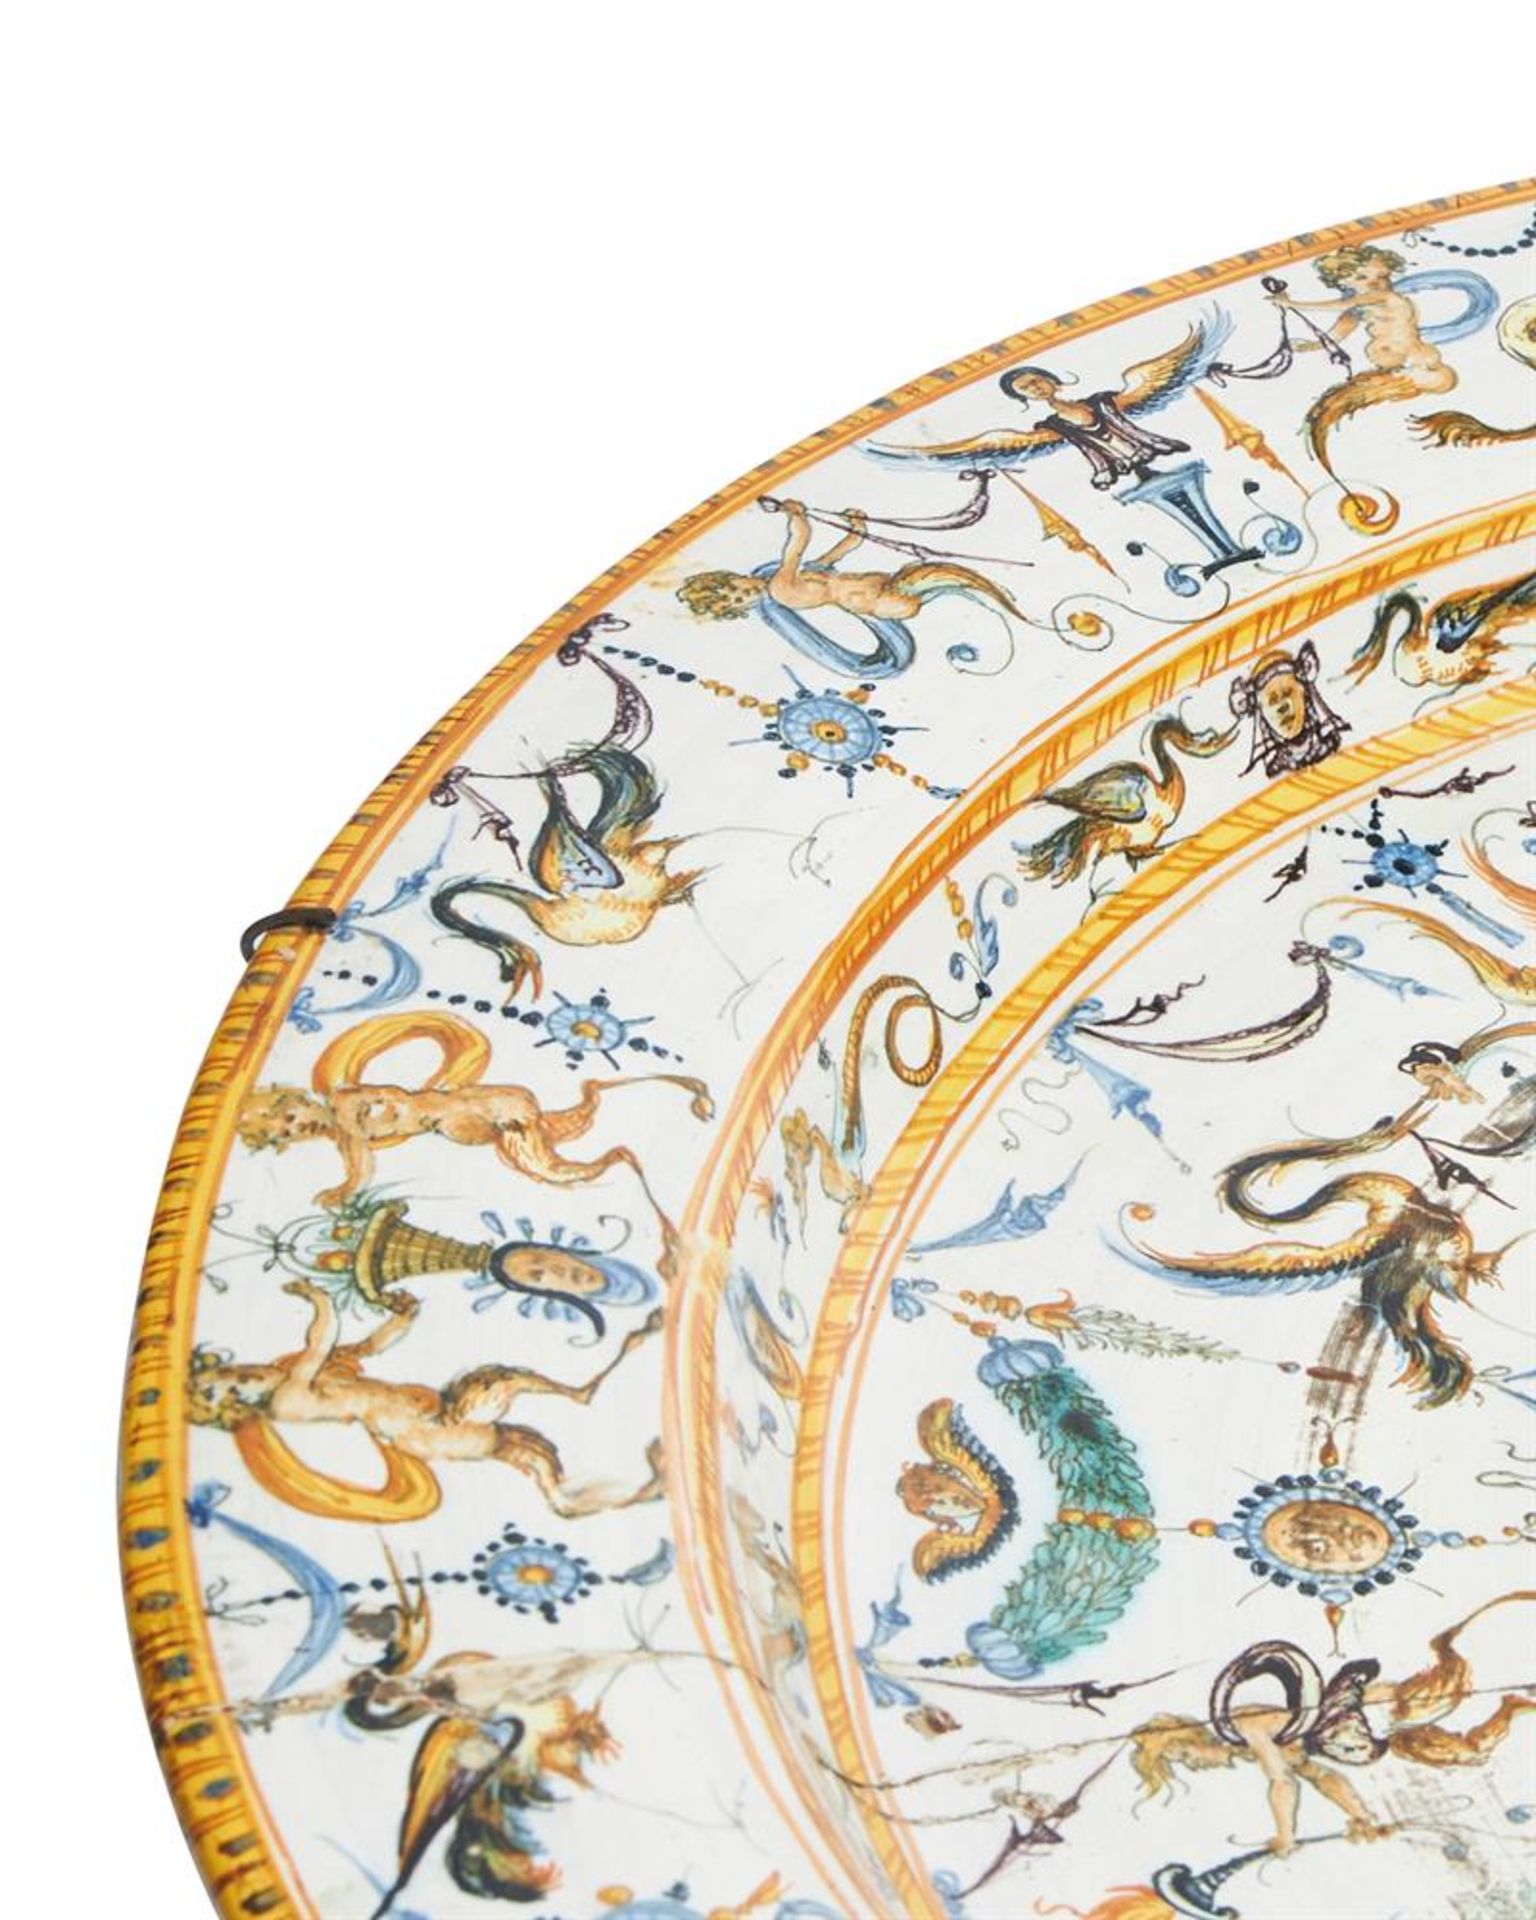 A MAIOLICA CHARGER, LATE 16TH CENTURY/EARLY 17TH CENTURY - Image 5 of 9